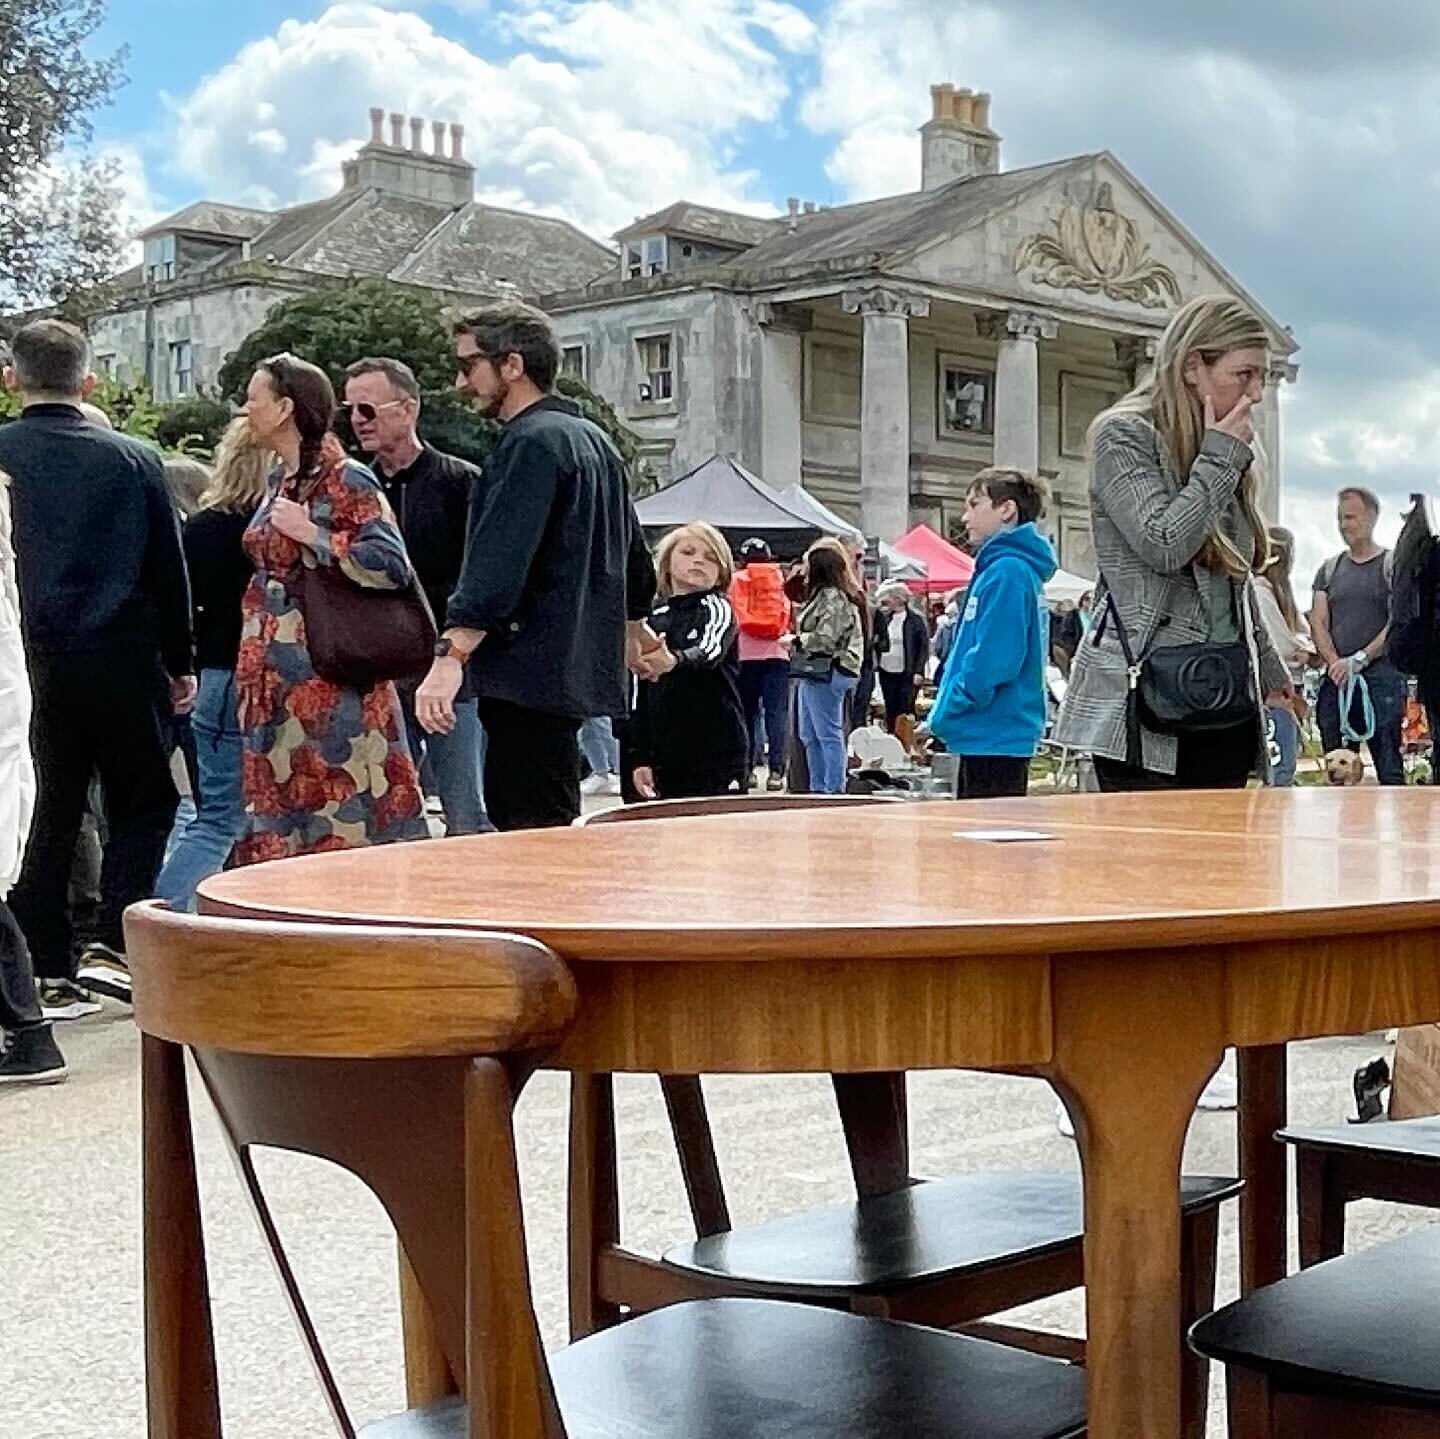 On Easter Monday - Vintage Market at the Mansion, 01 April at Beckenham Place Park 🌱🏛🐣
@beckenhamplace

50 great vintage dealers outdoors and inside the Mansion:

Mid 20th-century furniture, lighting, ceramics and homeware, original travel posters